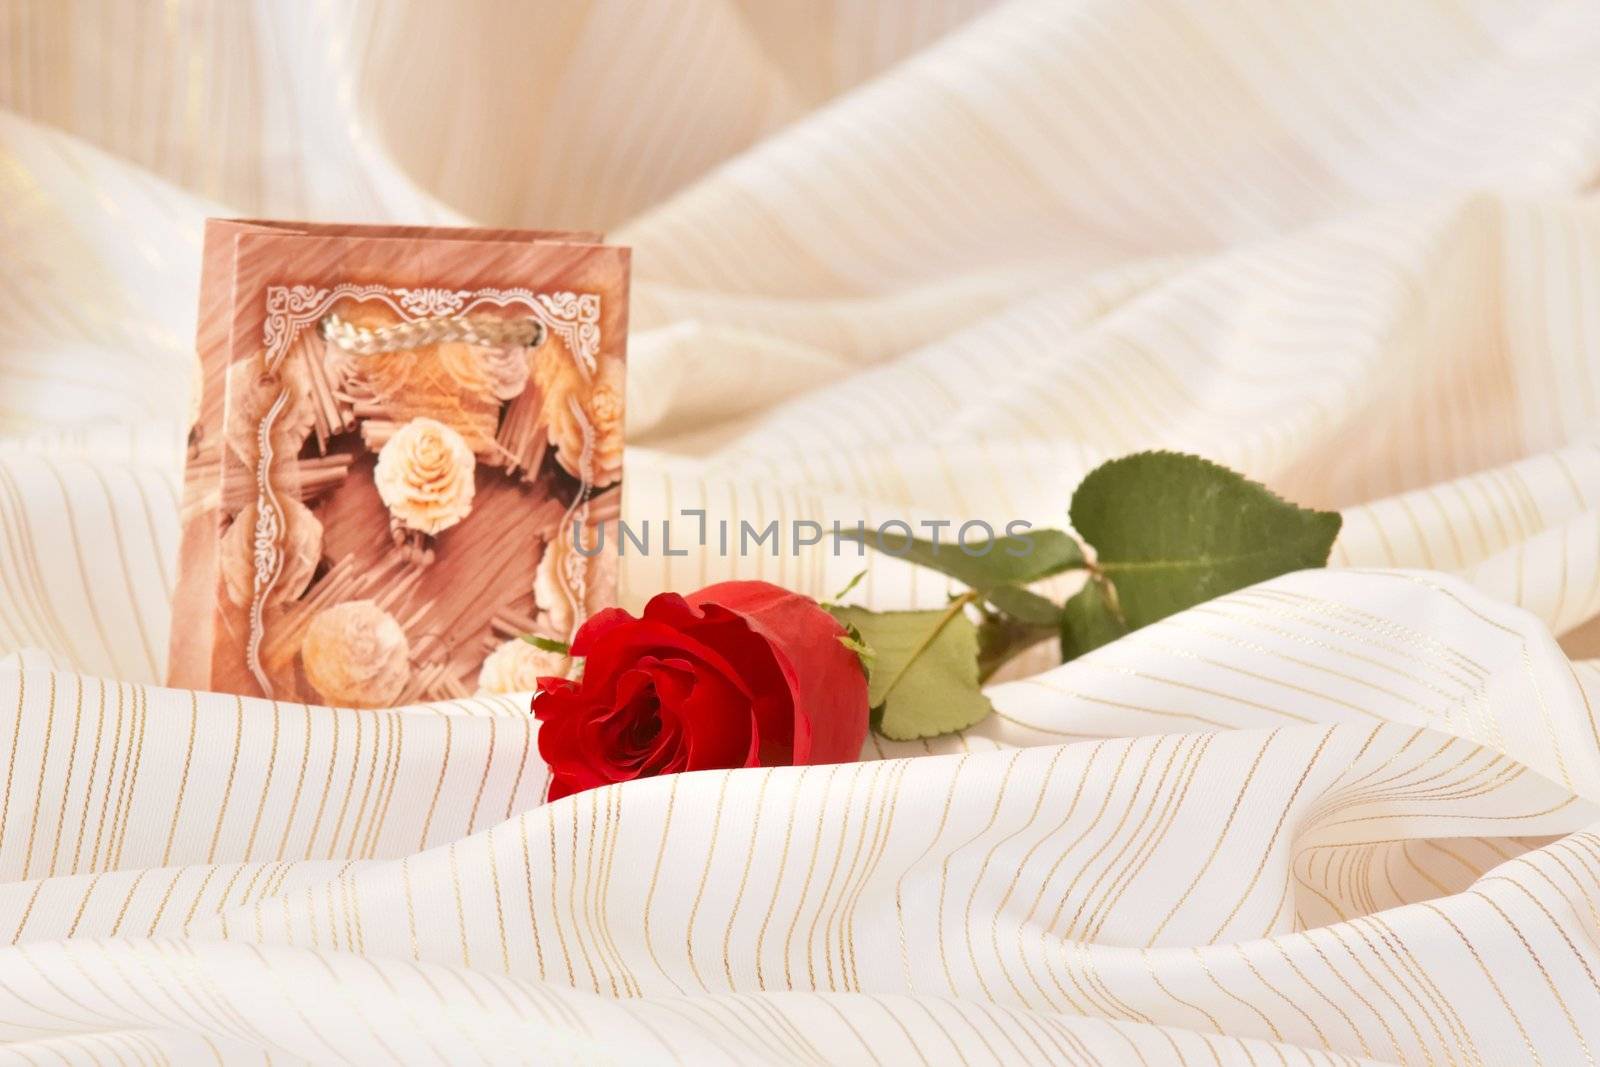 An image of red rose and box